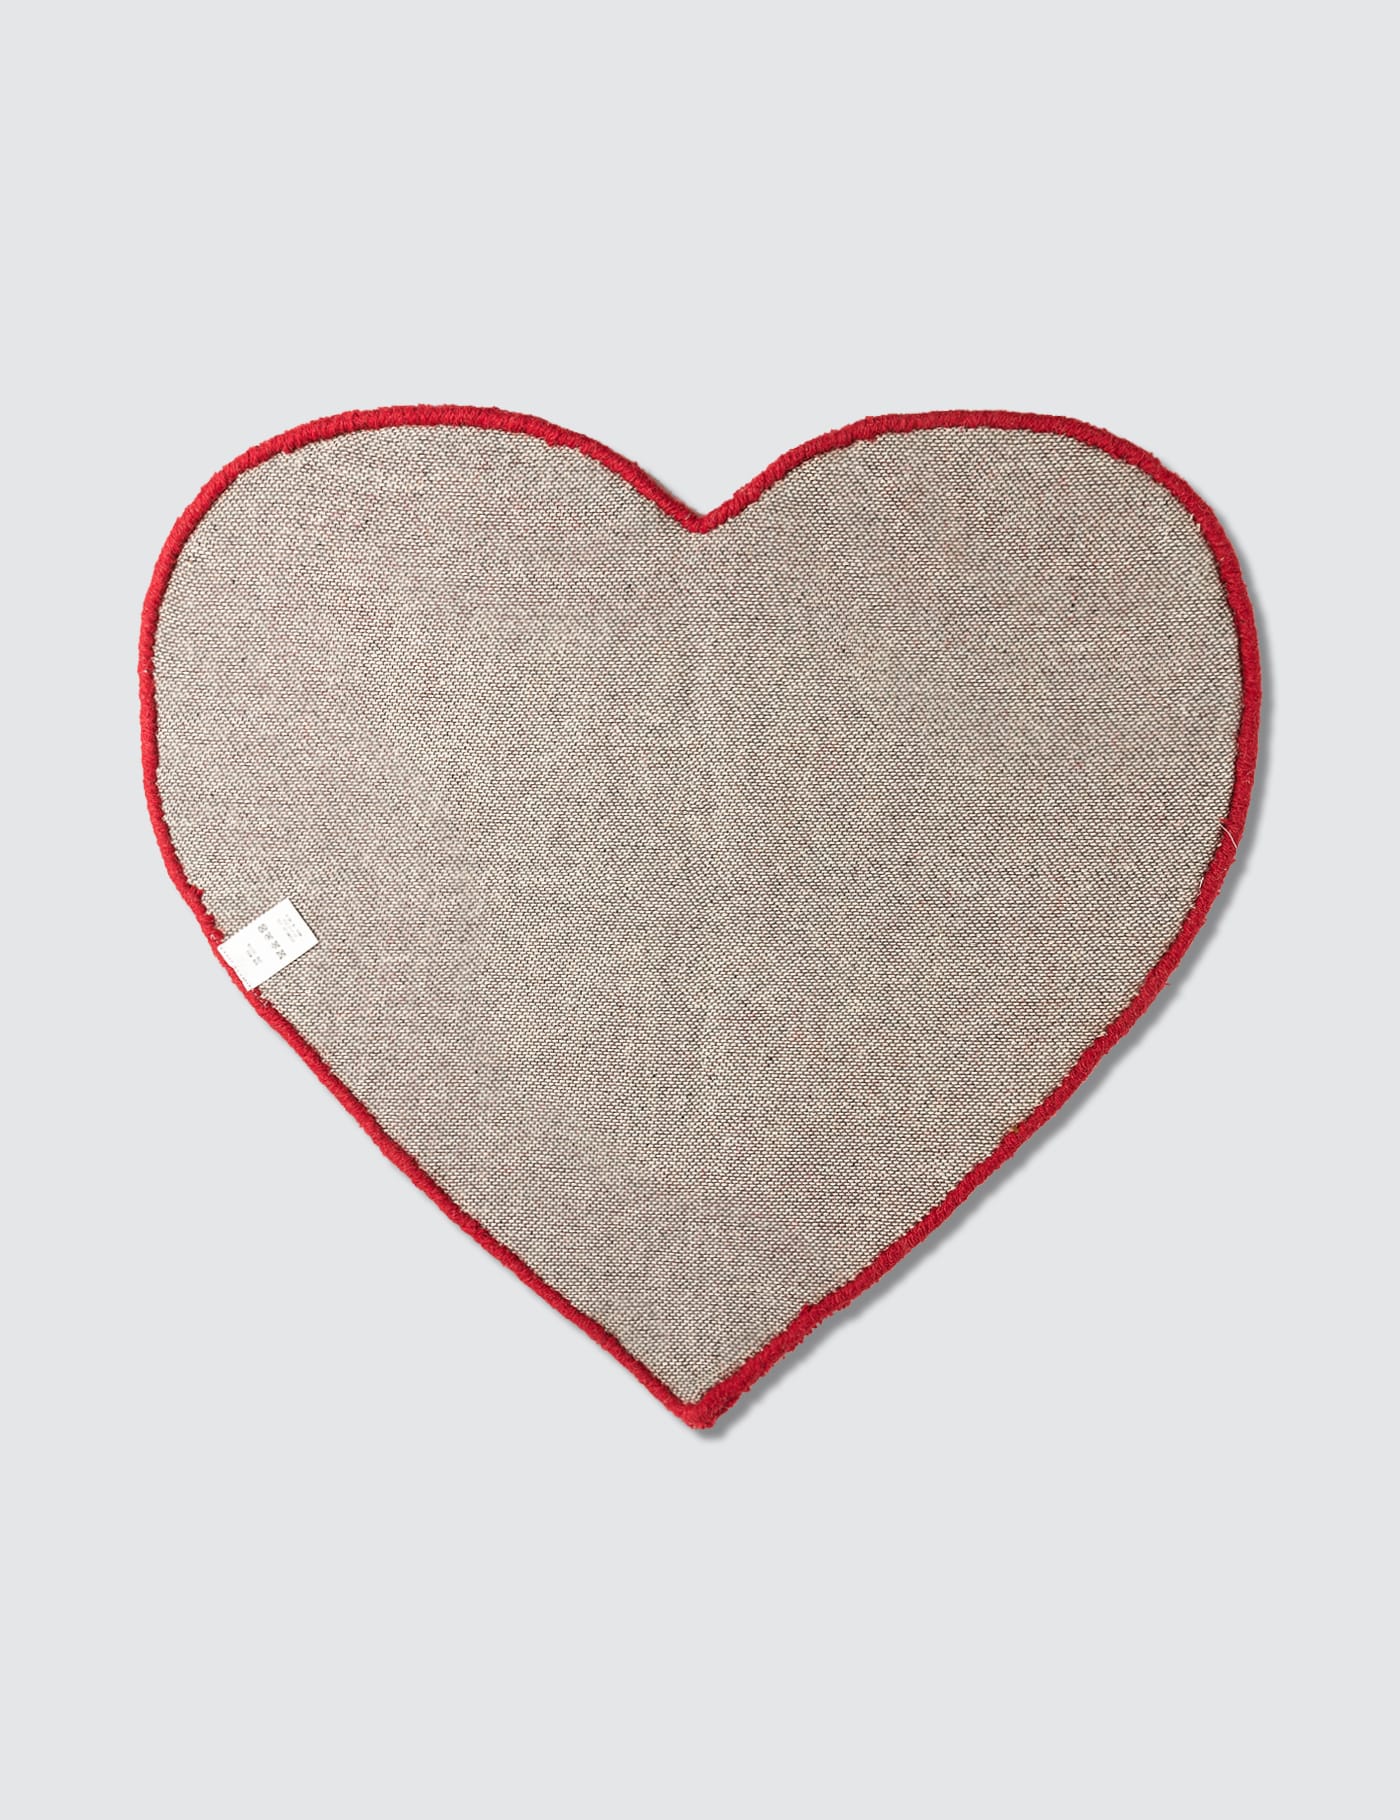 Human Made - Heart Rug | HBX - Globally Curated Fashion and 